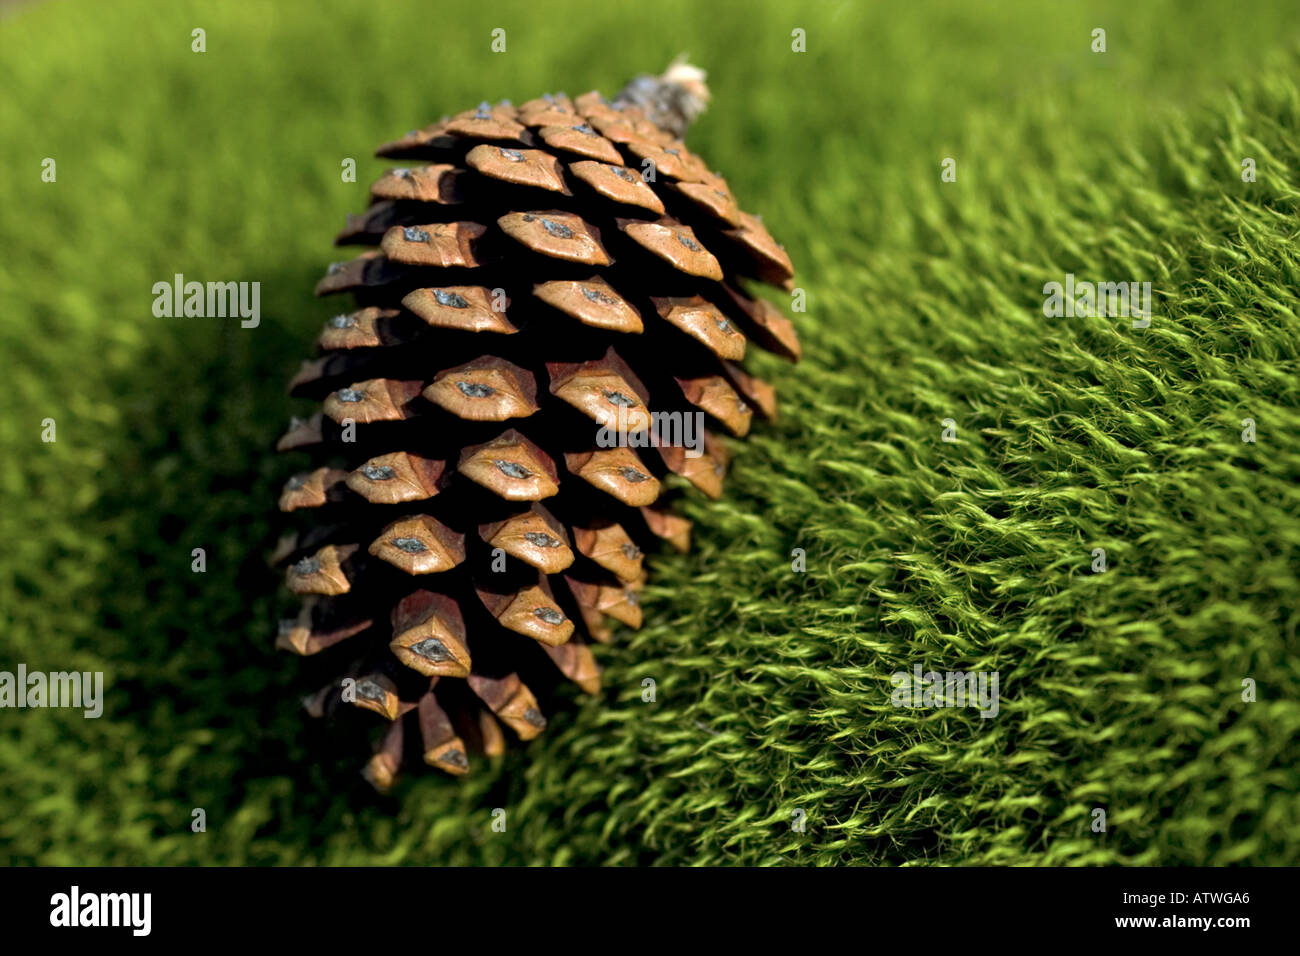 pine cone on a bed of moss Stock Photo